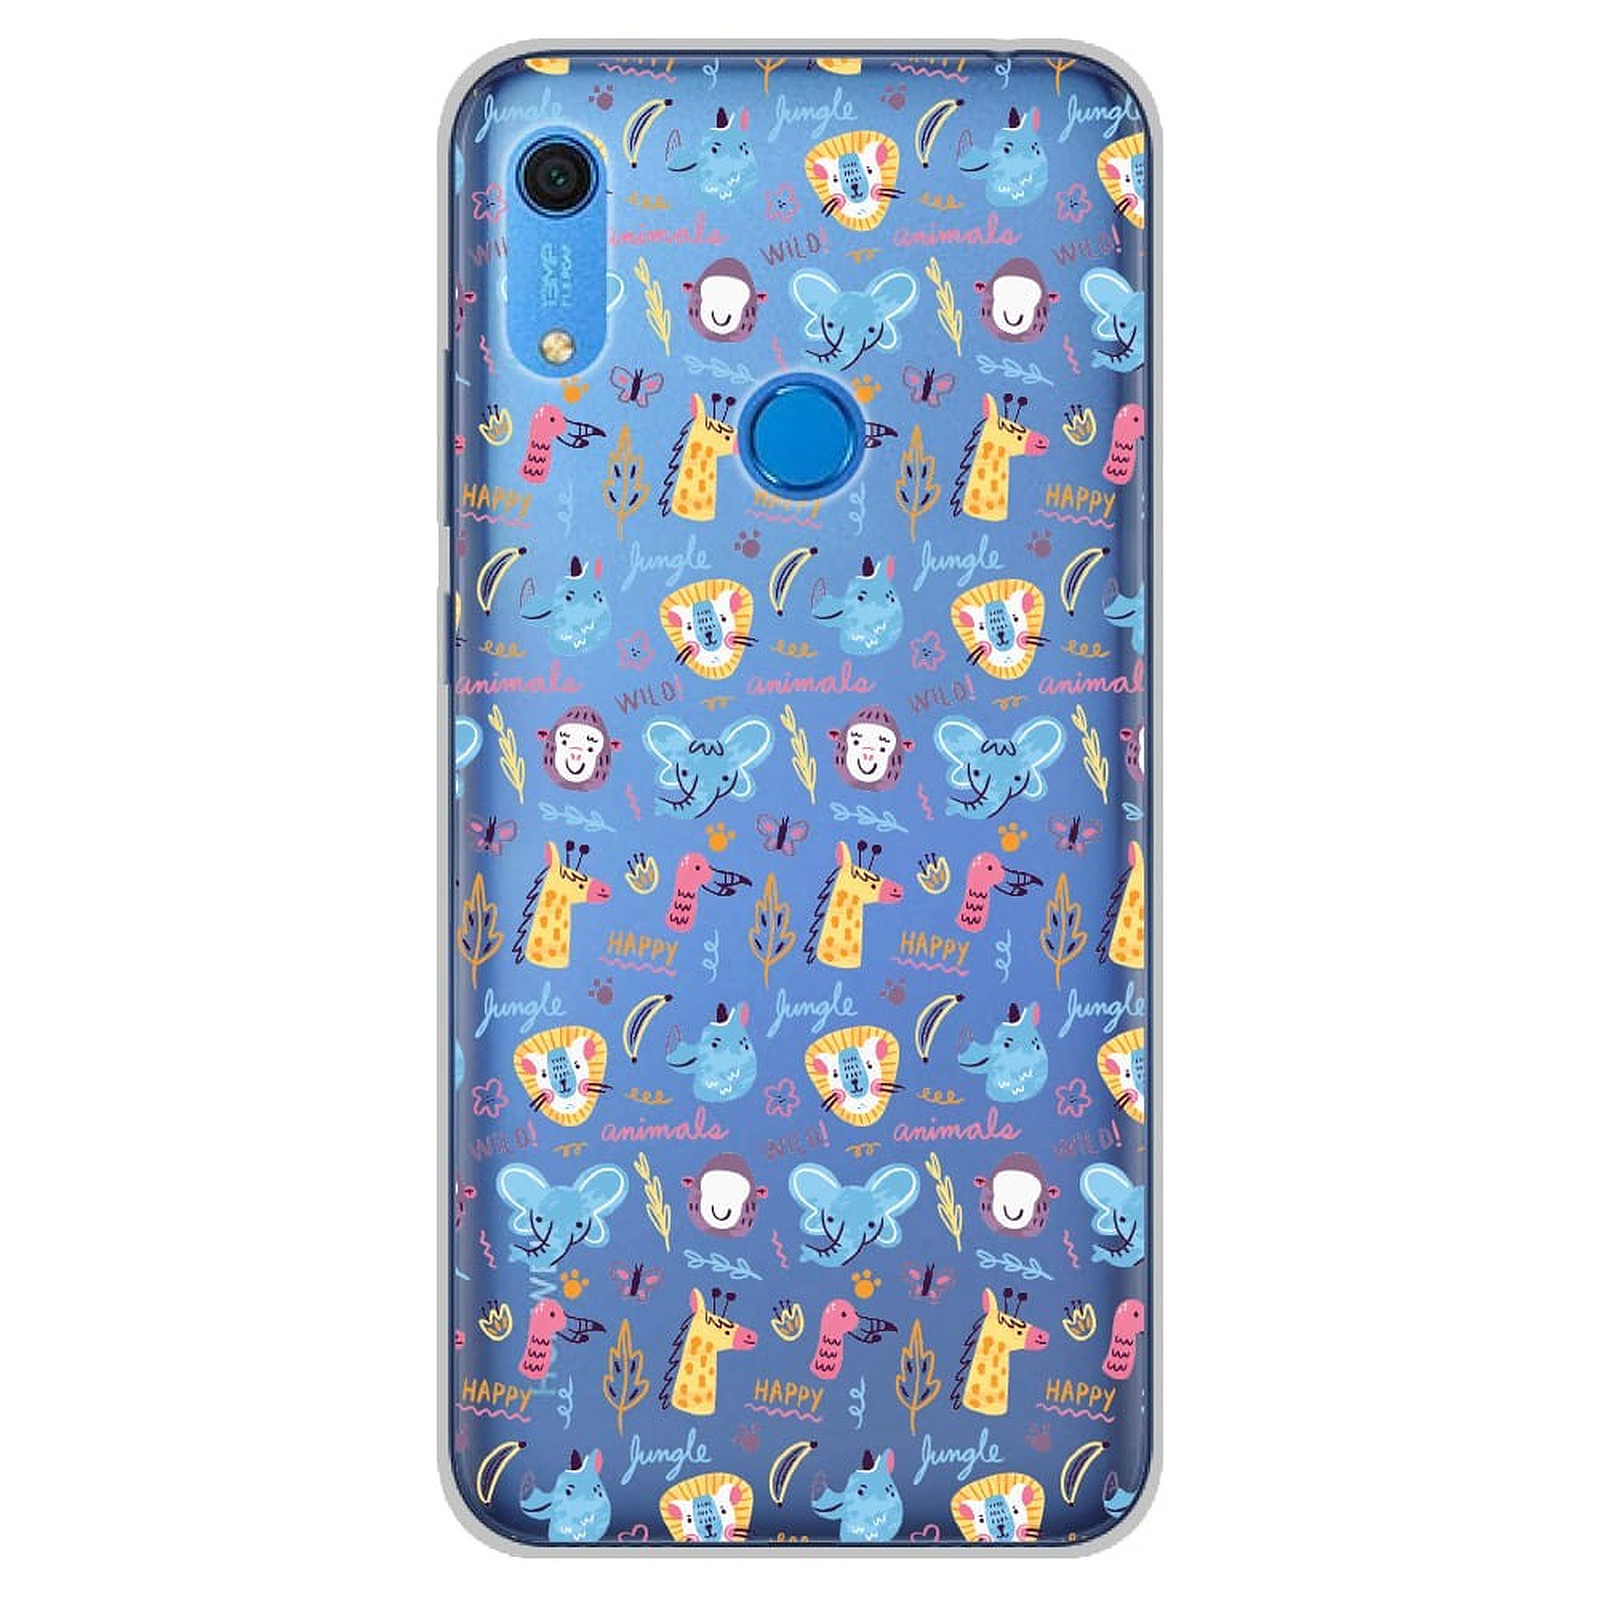 1001 Coques Coque silicone gel Huawei Y6S motif Happy animals - Coque telephone 1001Coques